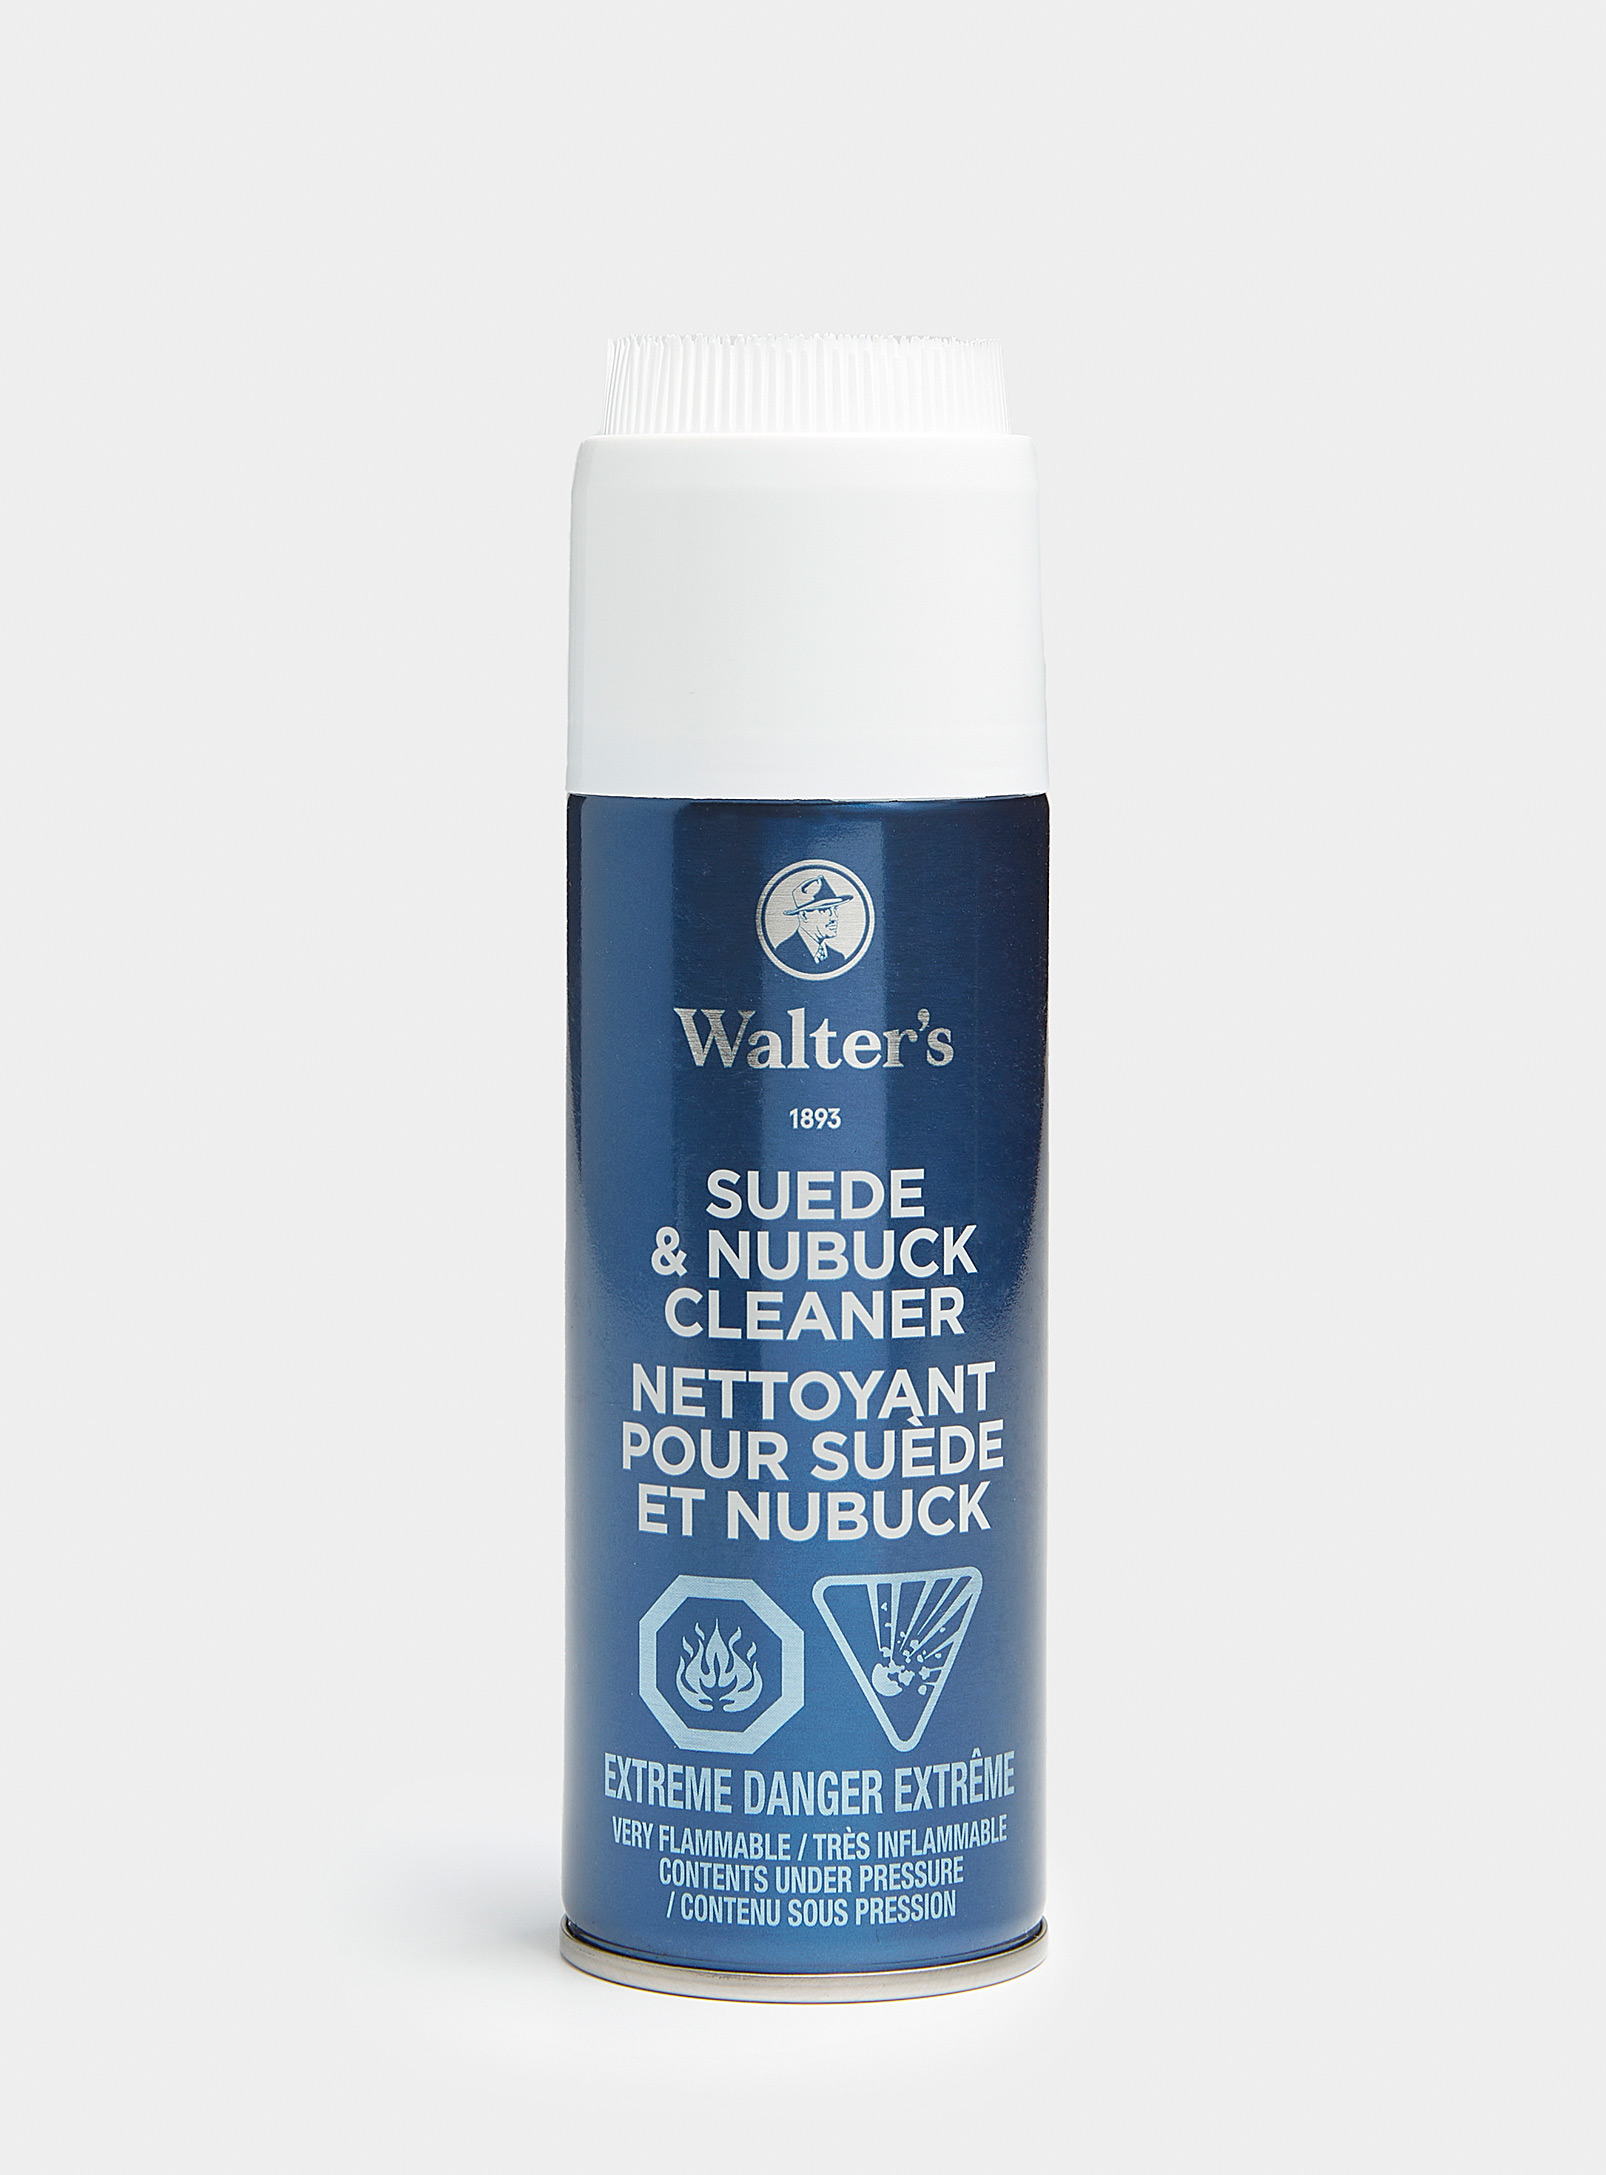 Walter's Suede And Nubuck Cleaner In Assorted